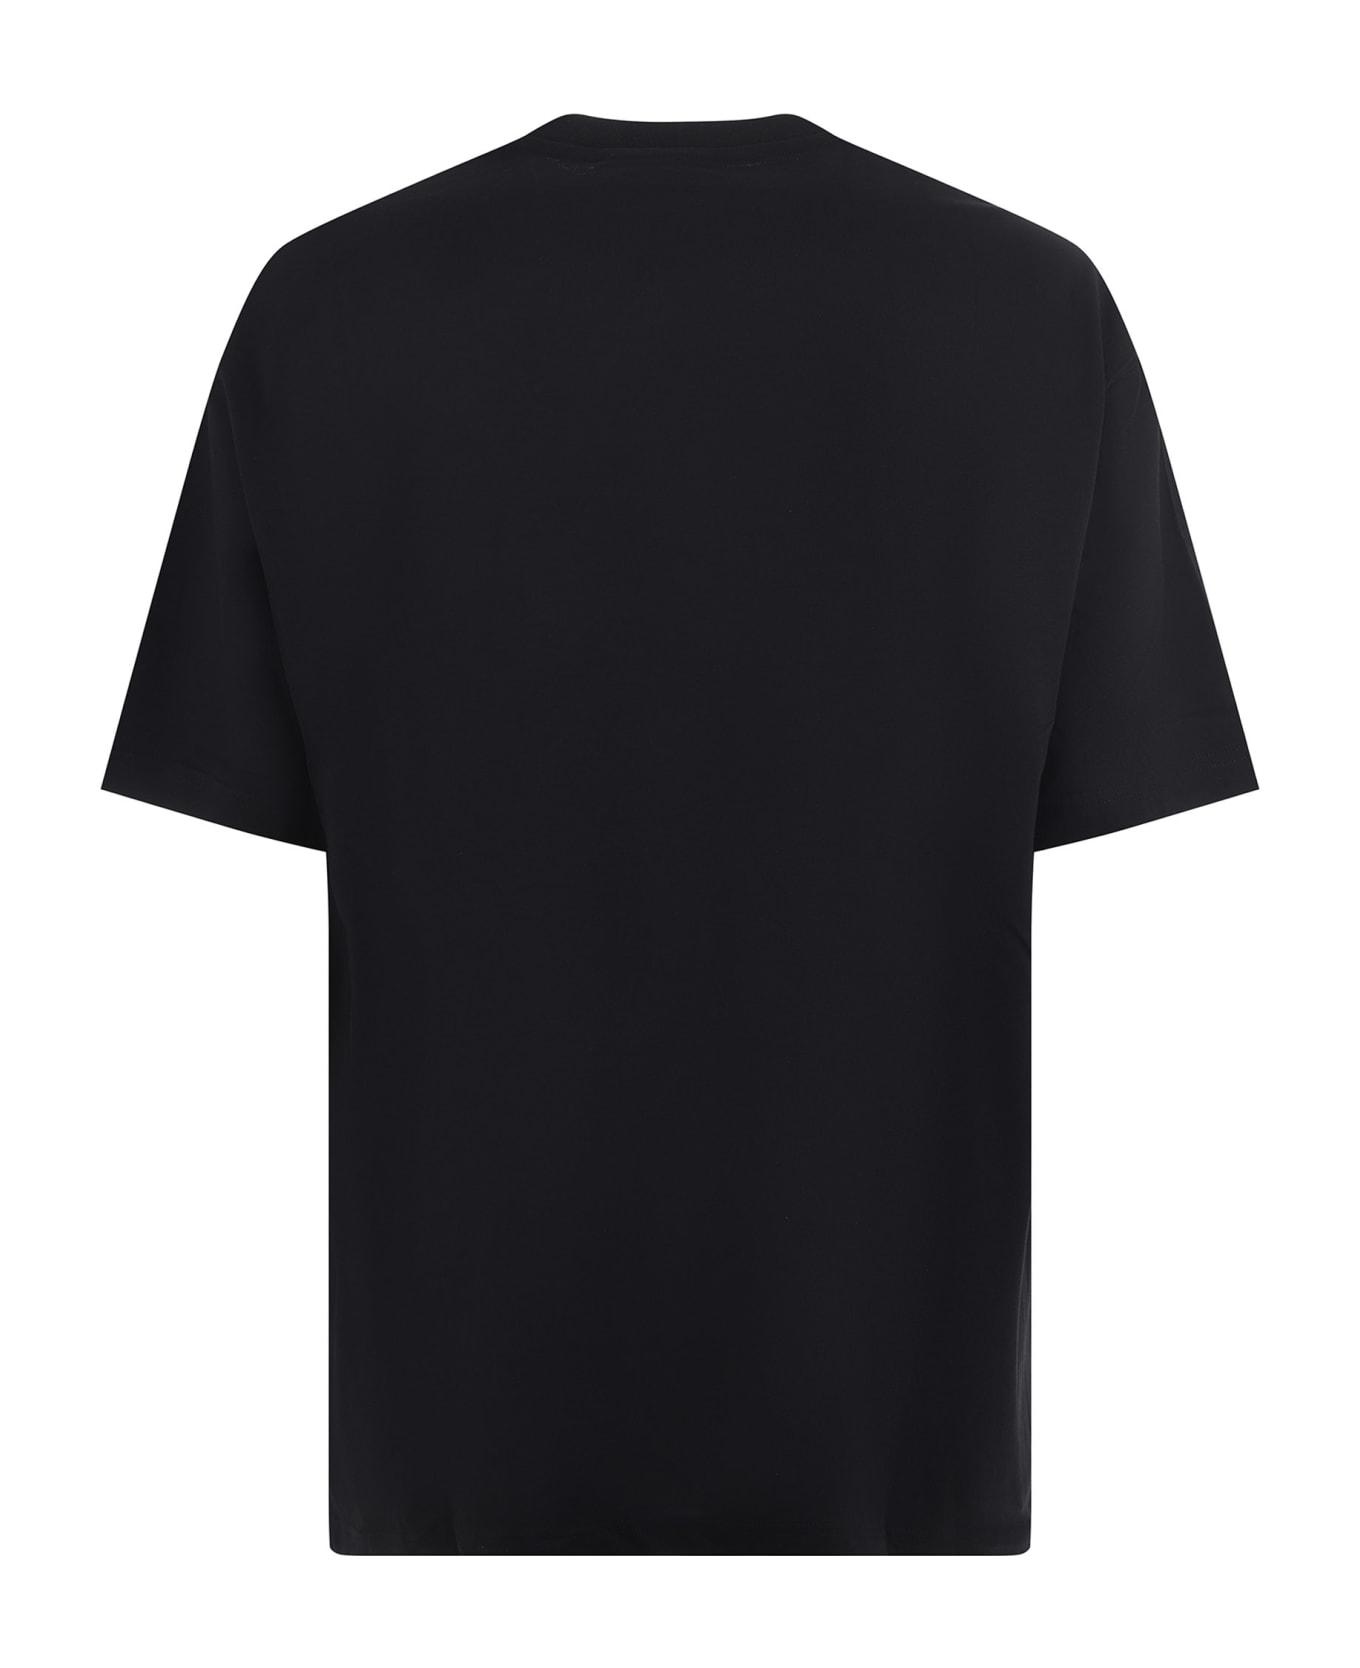 Versace Jeans Couture T-shirt - Nero シャツ